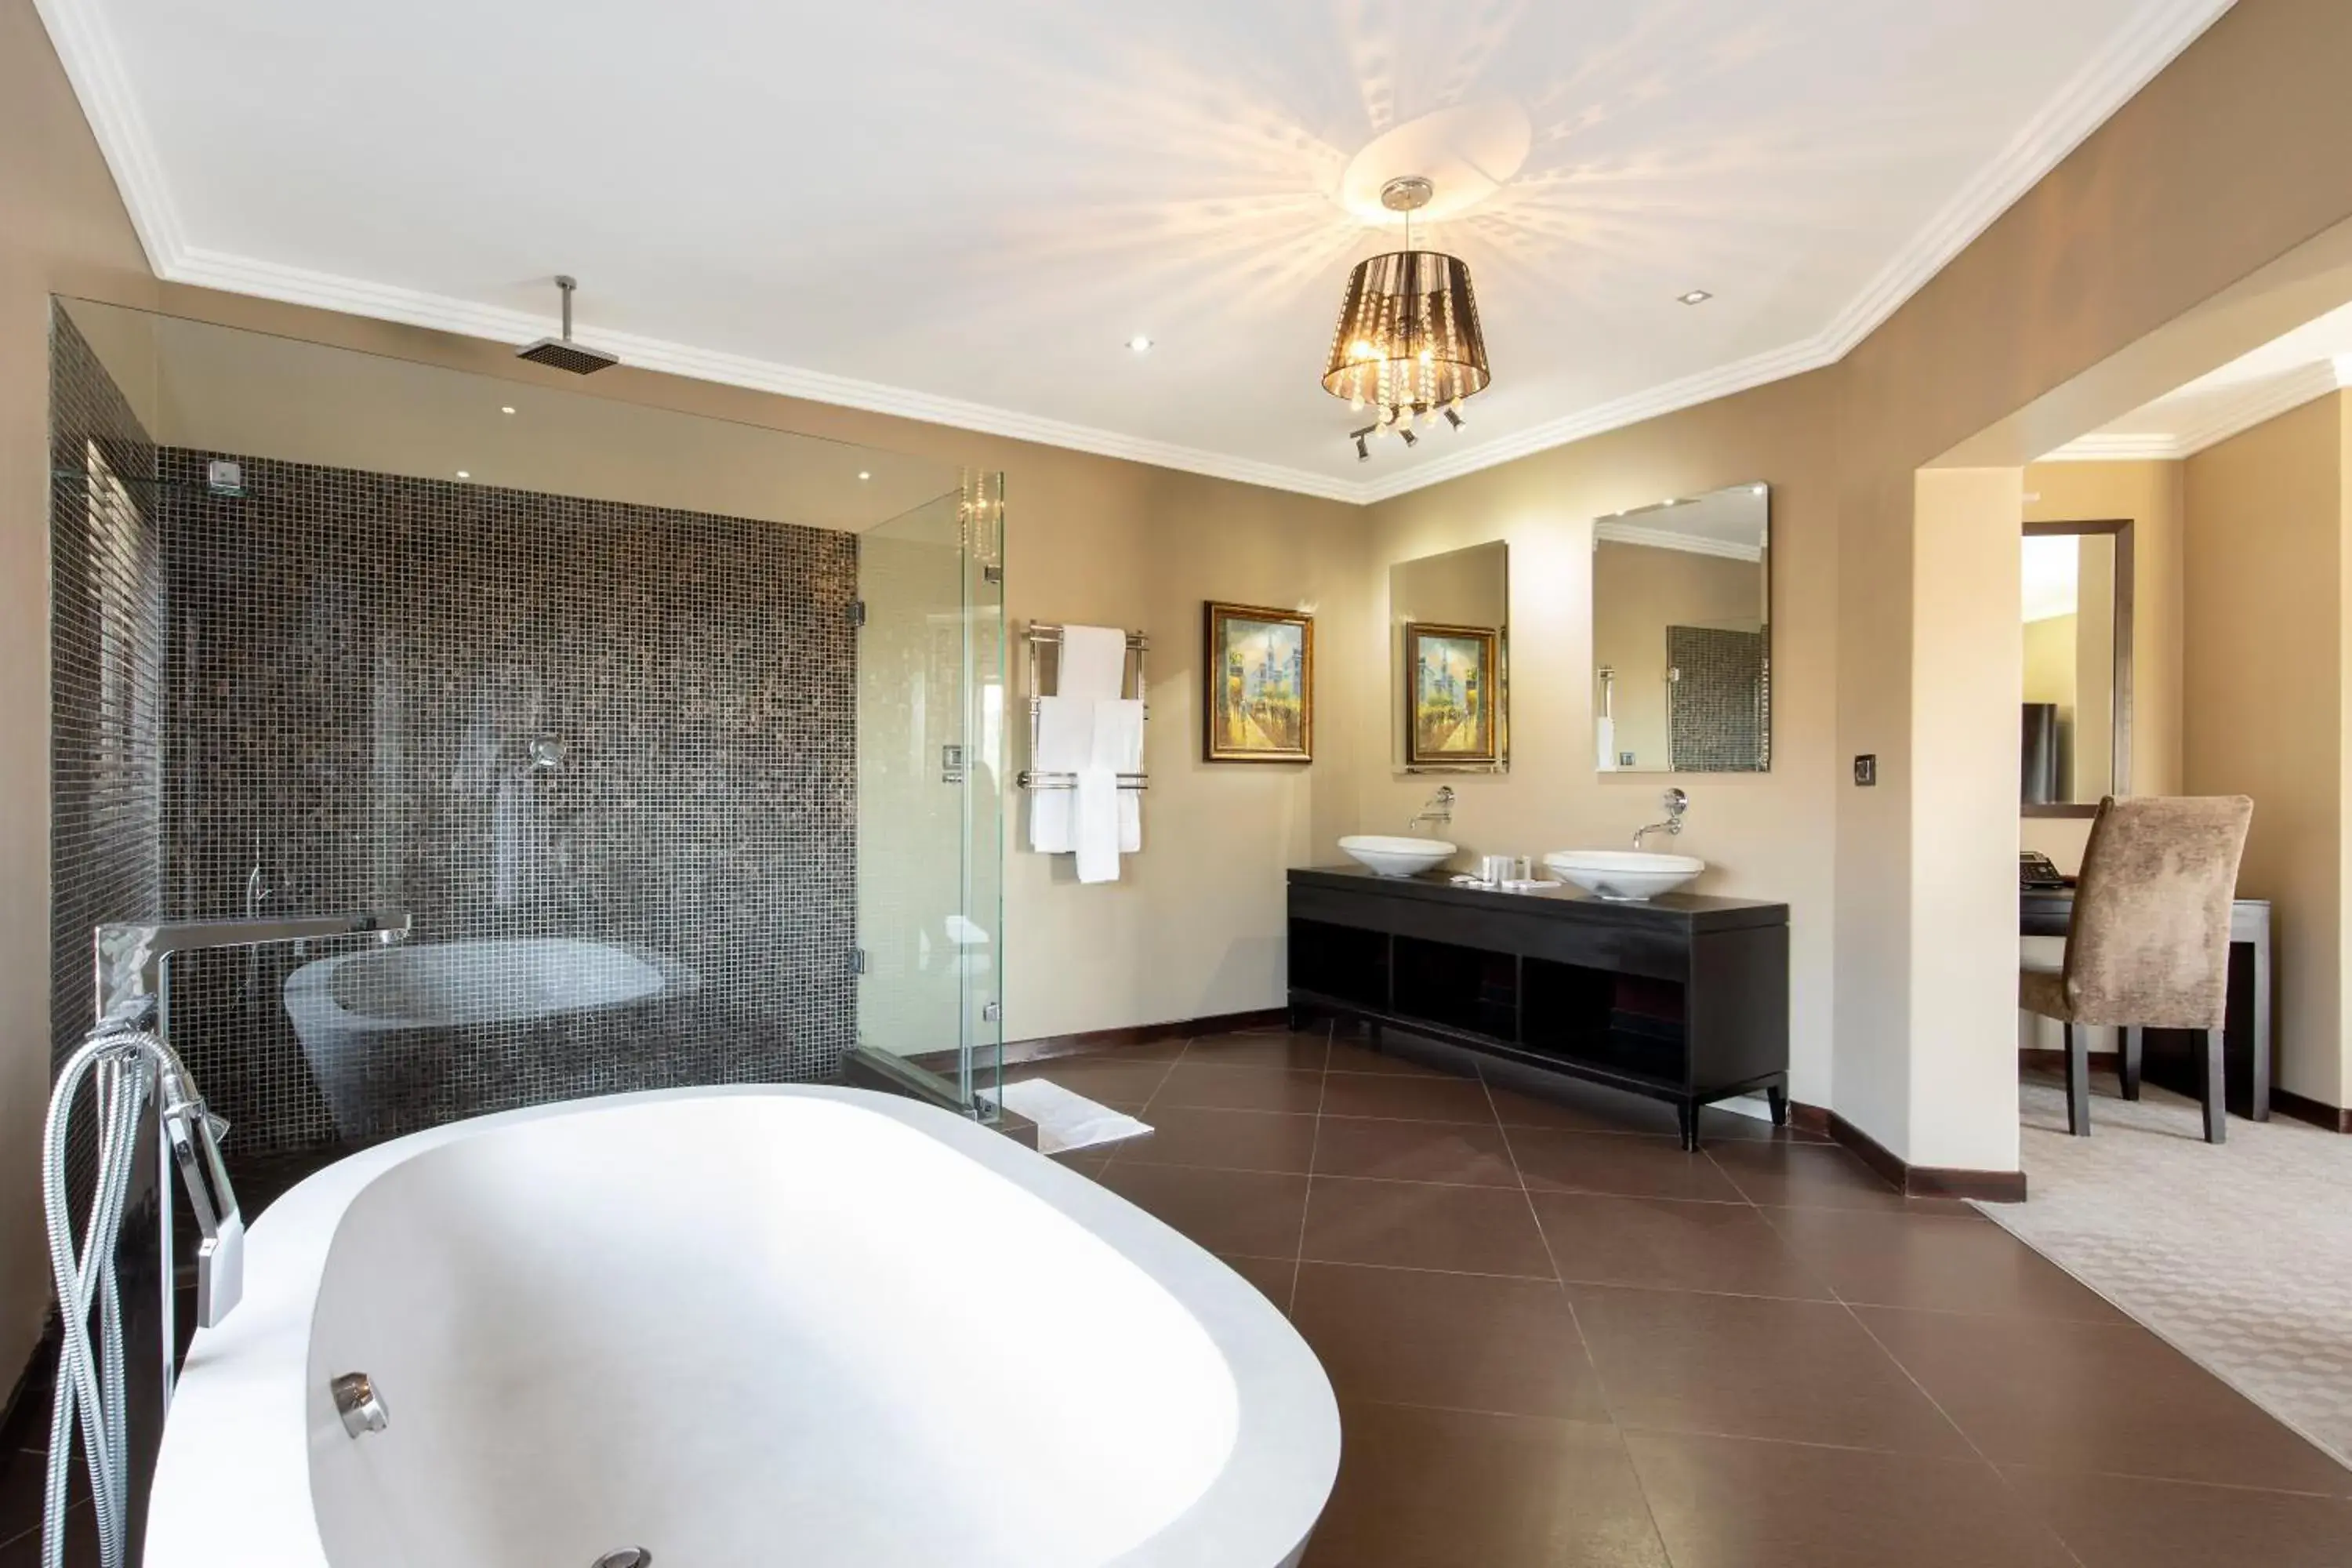 Bathroom in St Andrews Hotel and Spa